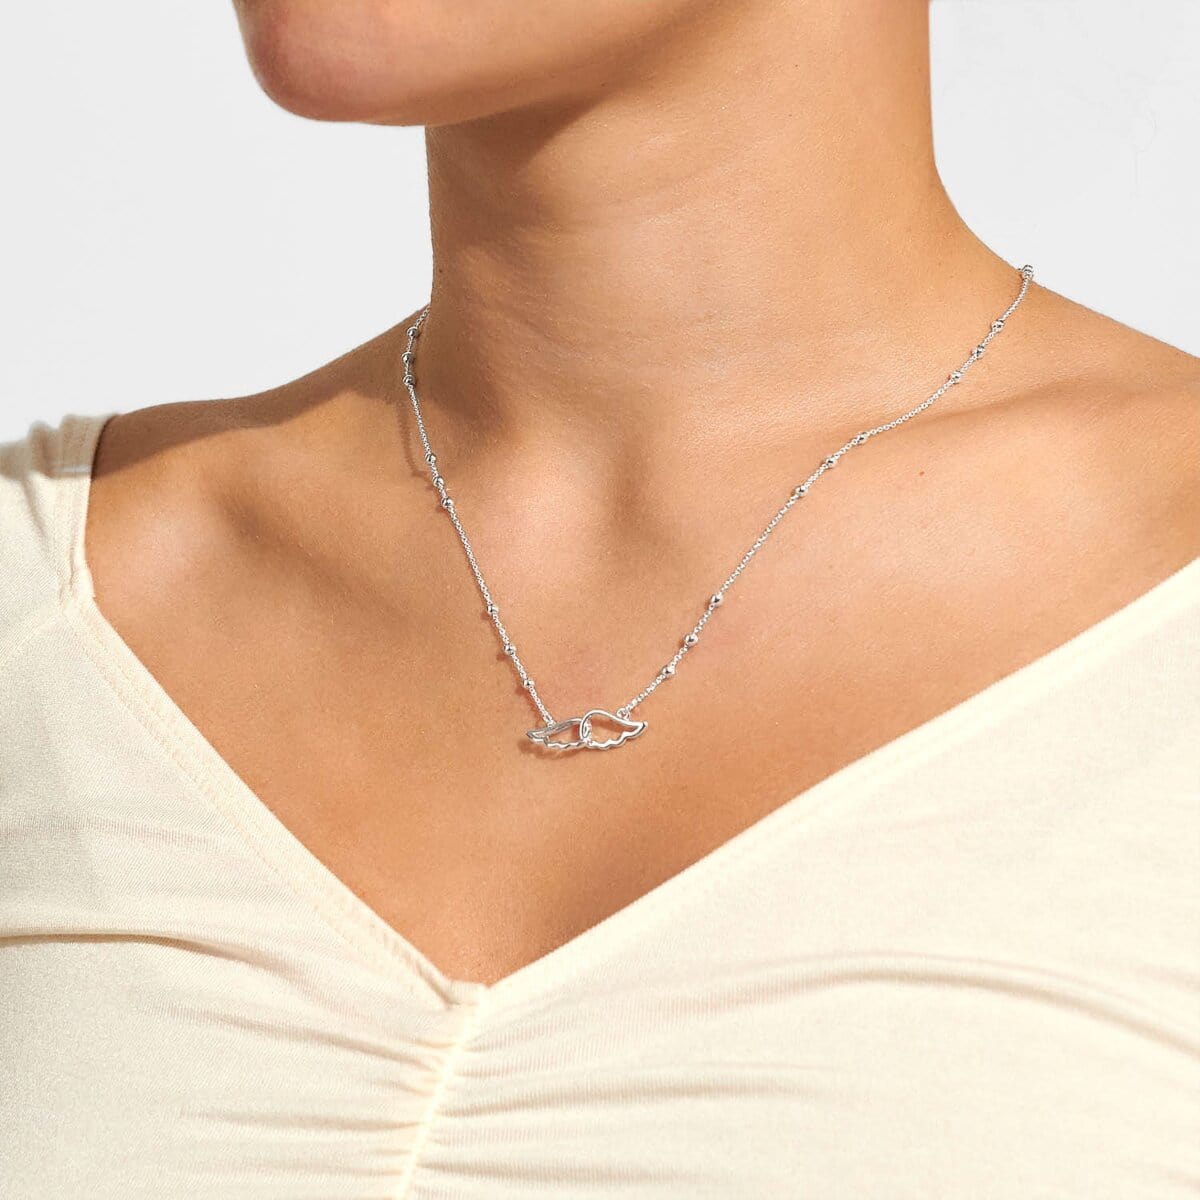 Joma Jewellery Necklace Joma Jewellery Forever Yours Necklace - Guardian Angel